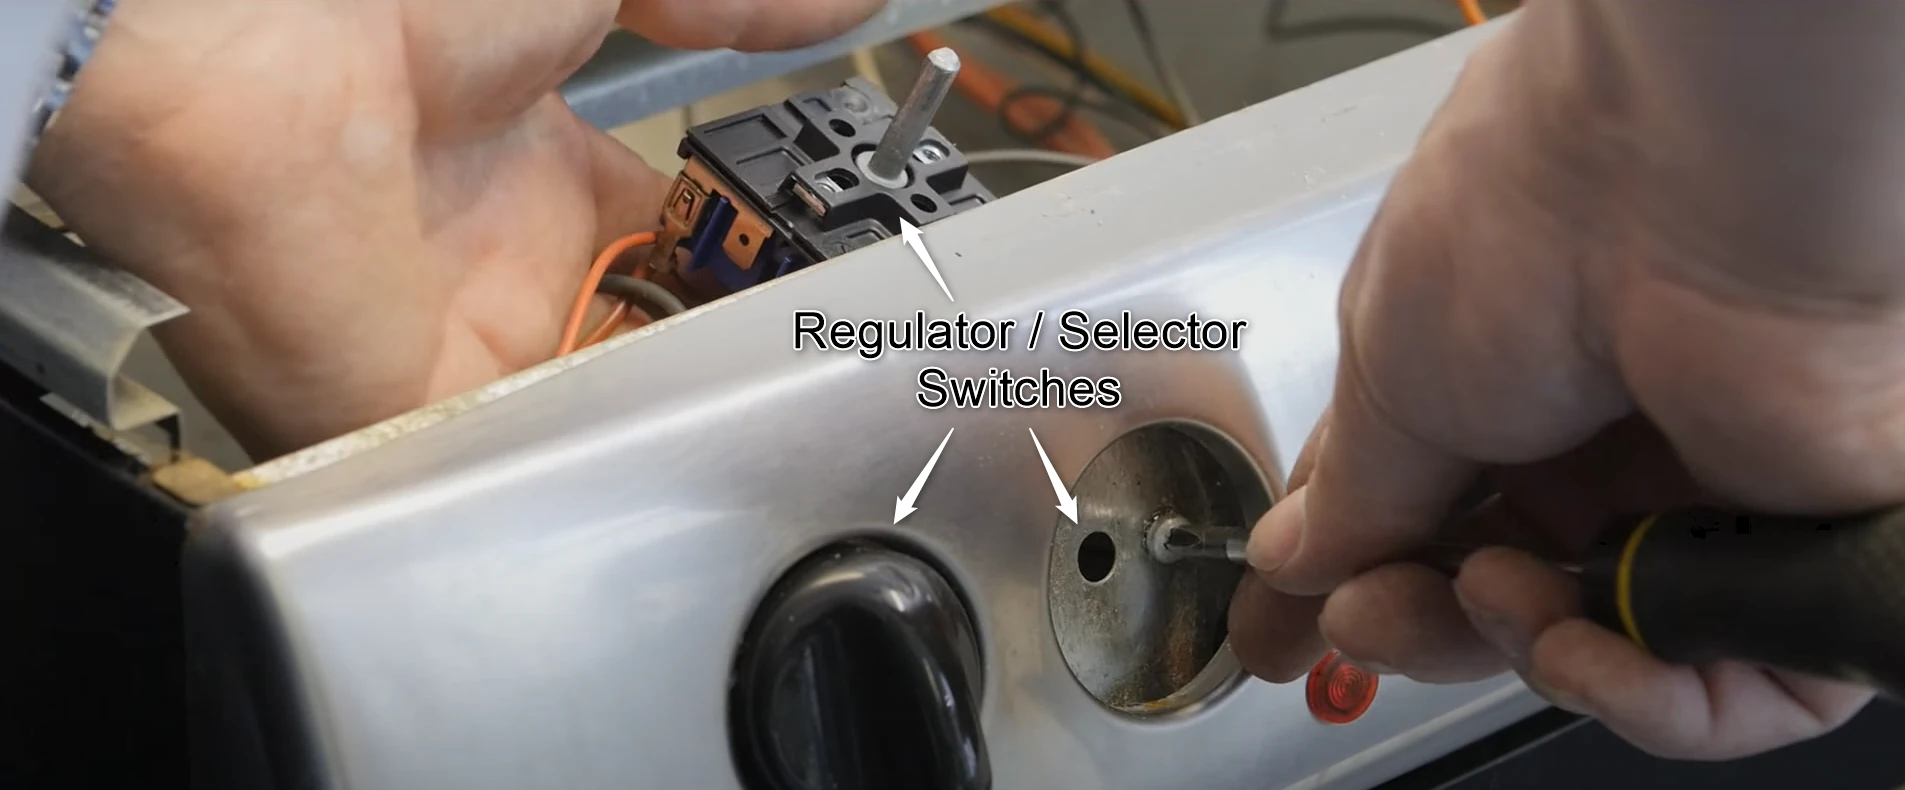 Replace stove regulator and selector switch